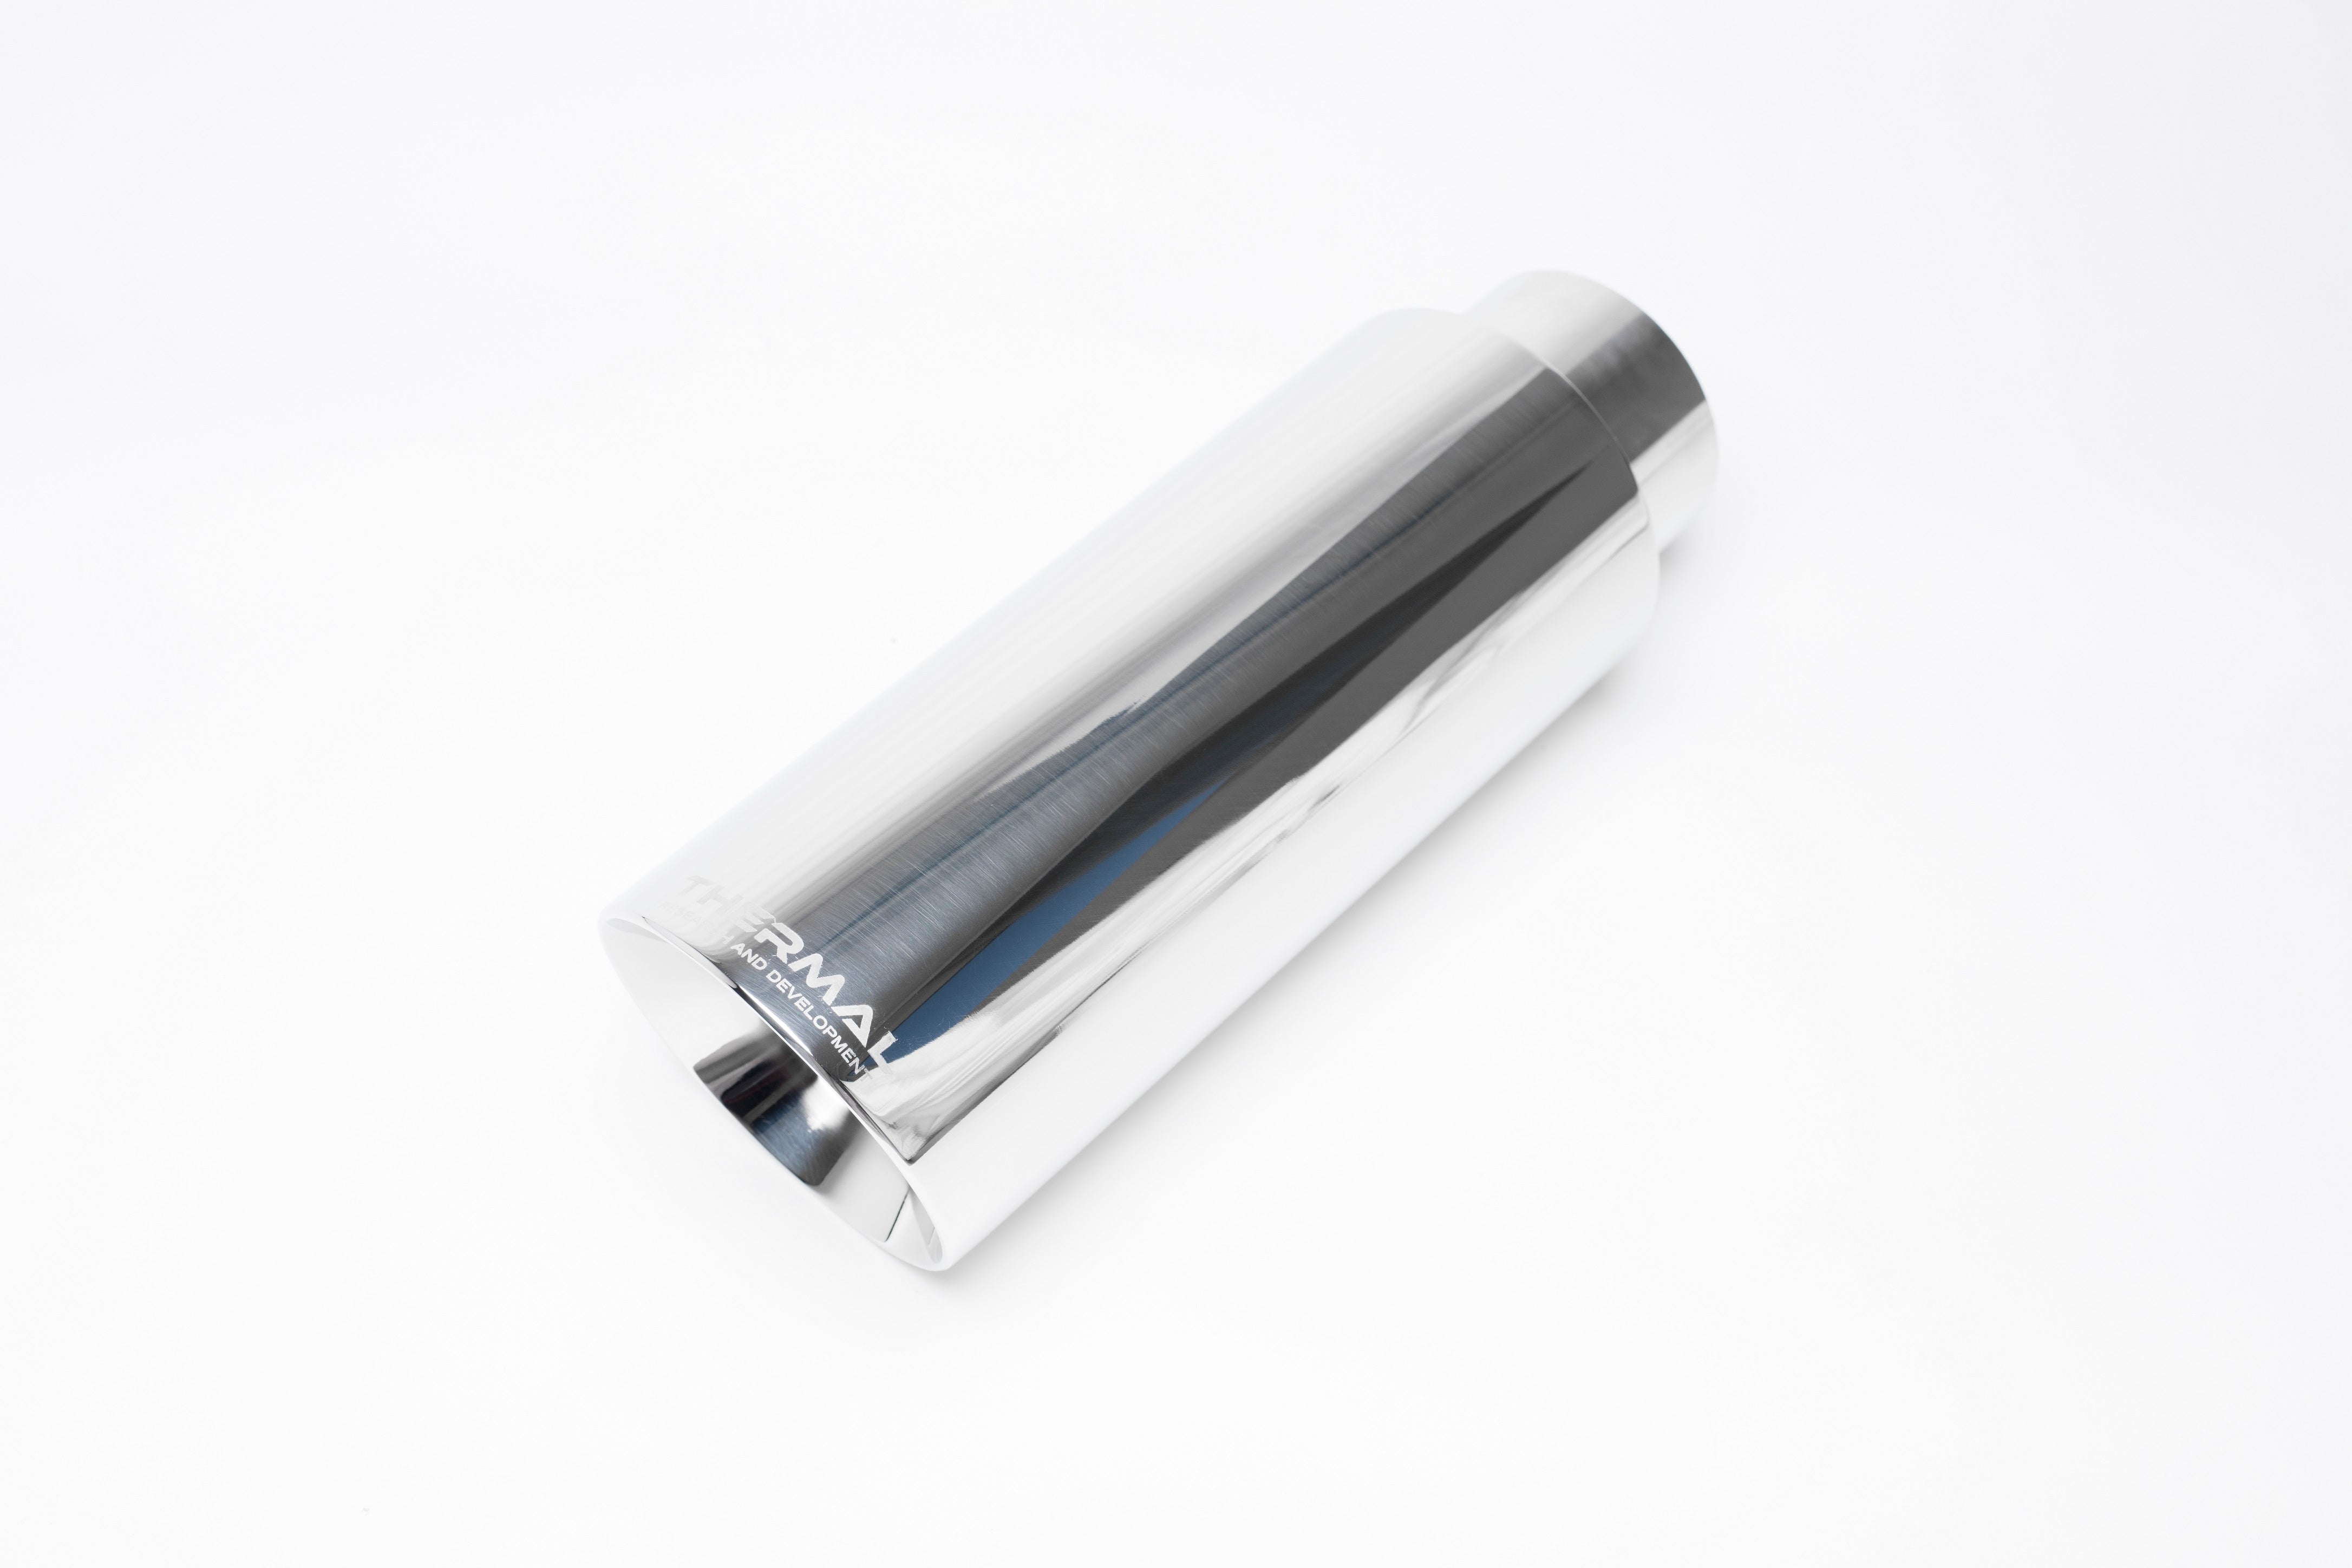 Thermal Tip 4" Dia x 12" Long x 3" Inlet - Angle